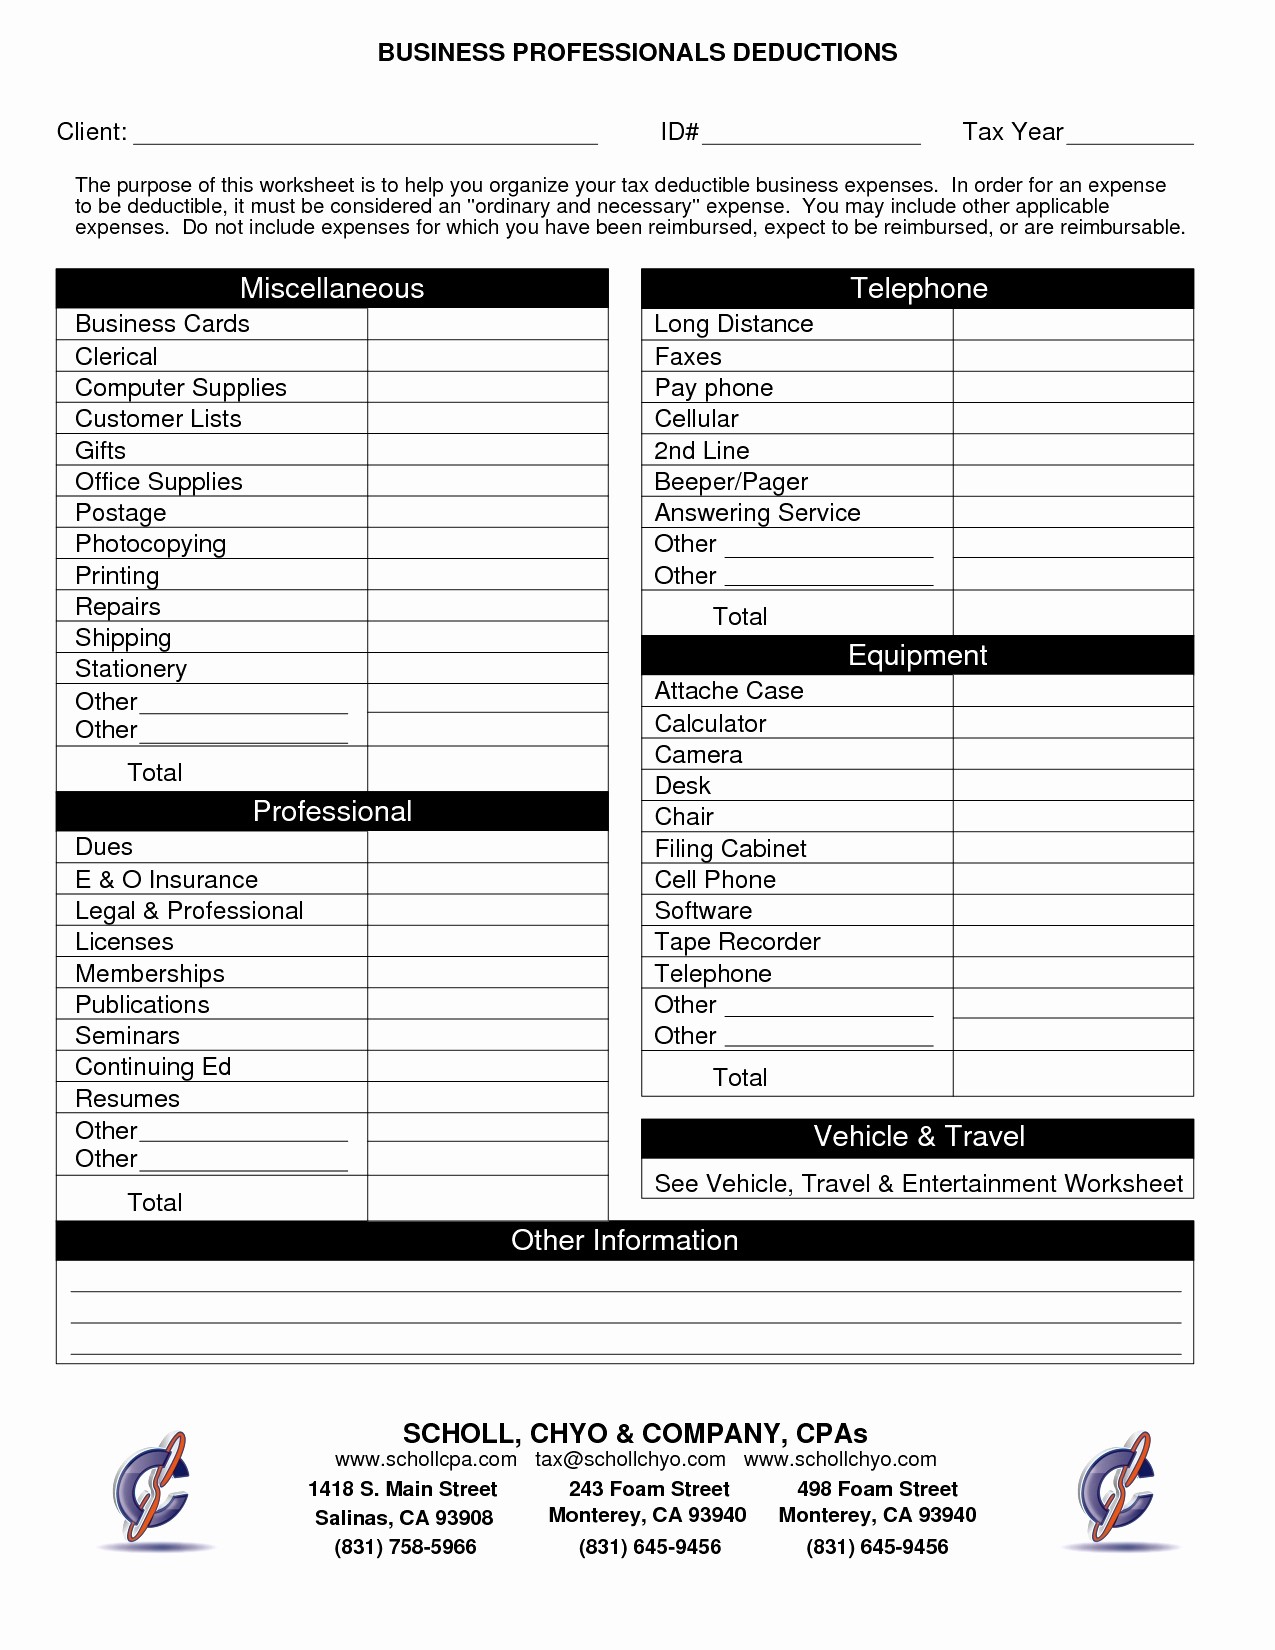 Itemized Deductions Worksheet For Small Business Awesome